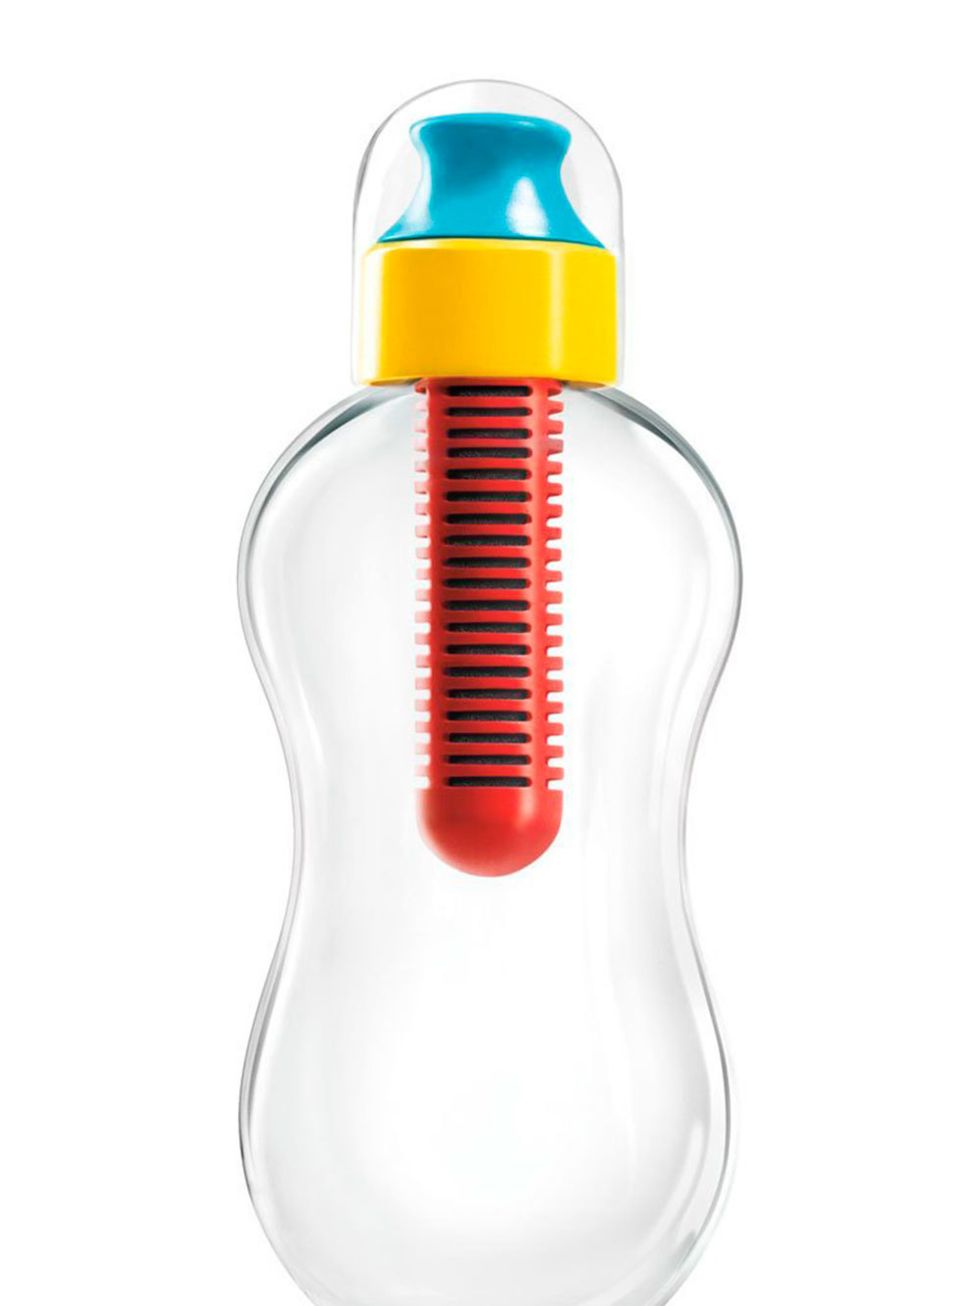 <p><a href="http://www.waterbobble.nl/bobble.html" target="_blank">Bobble bottle, from £9.99 </a></p>

<p>Filtered water on the run. Size options vary - we rate the mini if youre after a bottle to run with.   </p>